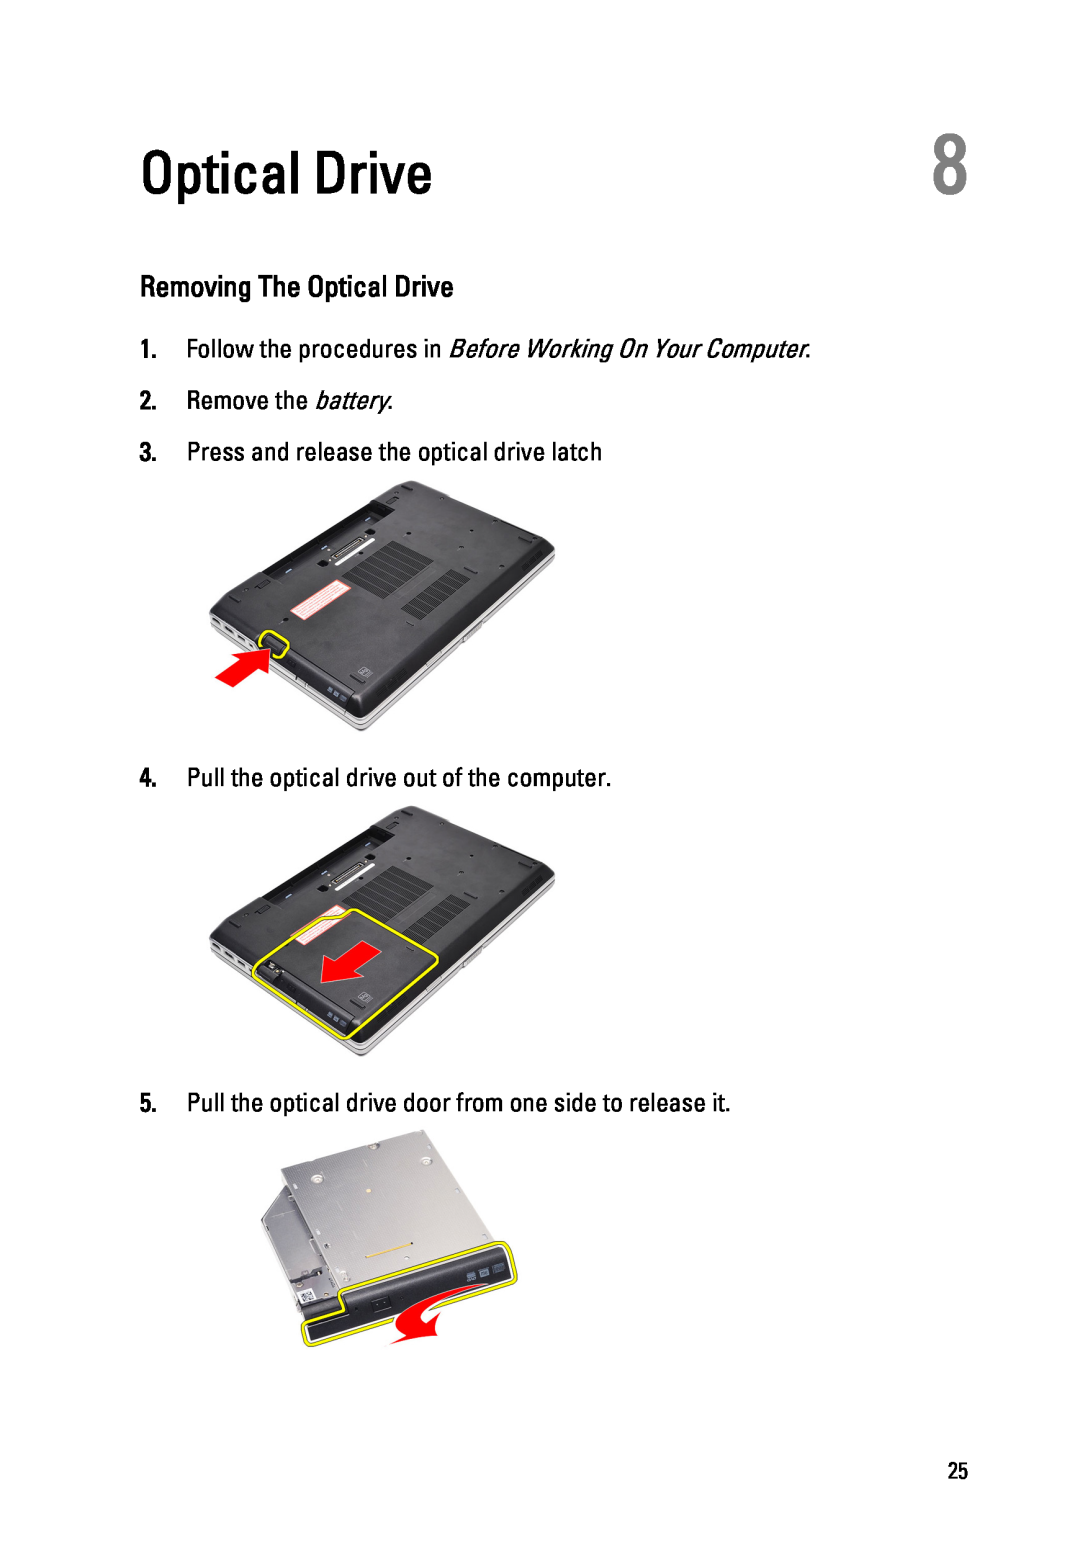 Dell E6520 owner manual Removing The Optical Drive, Remove the battery 3. Press and release the optical drive latch 